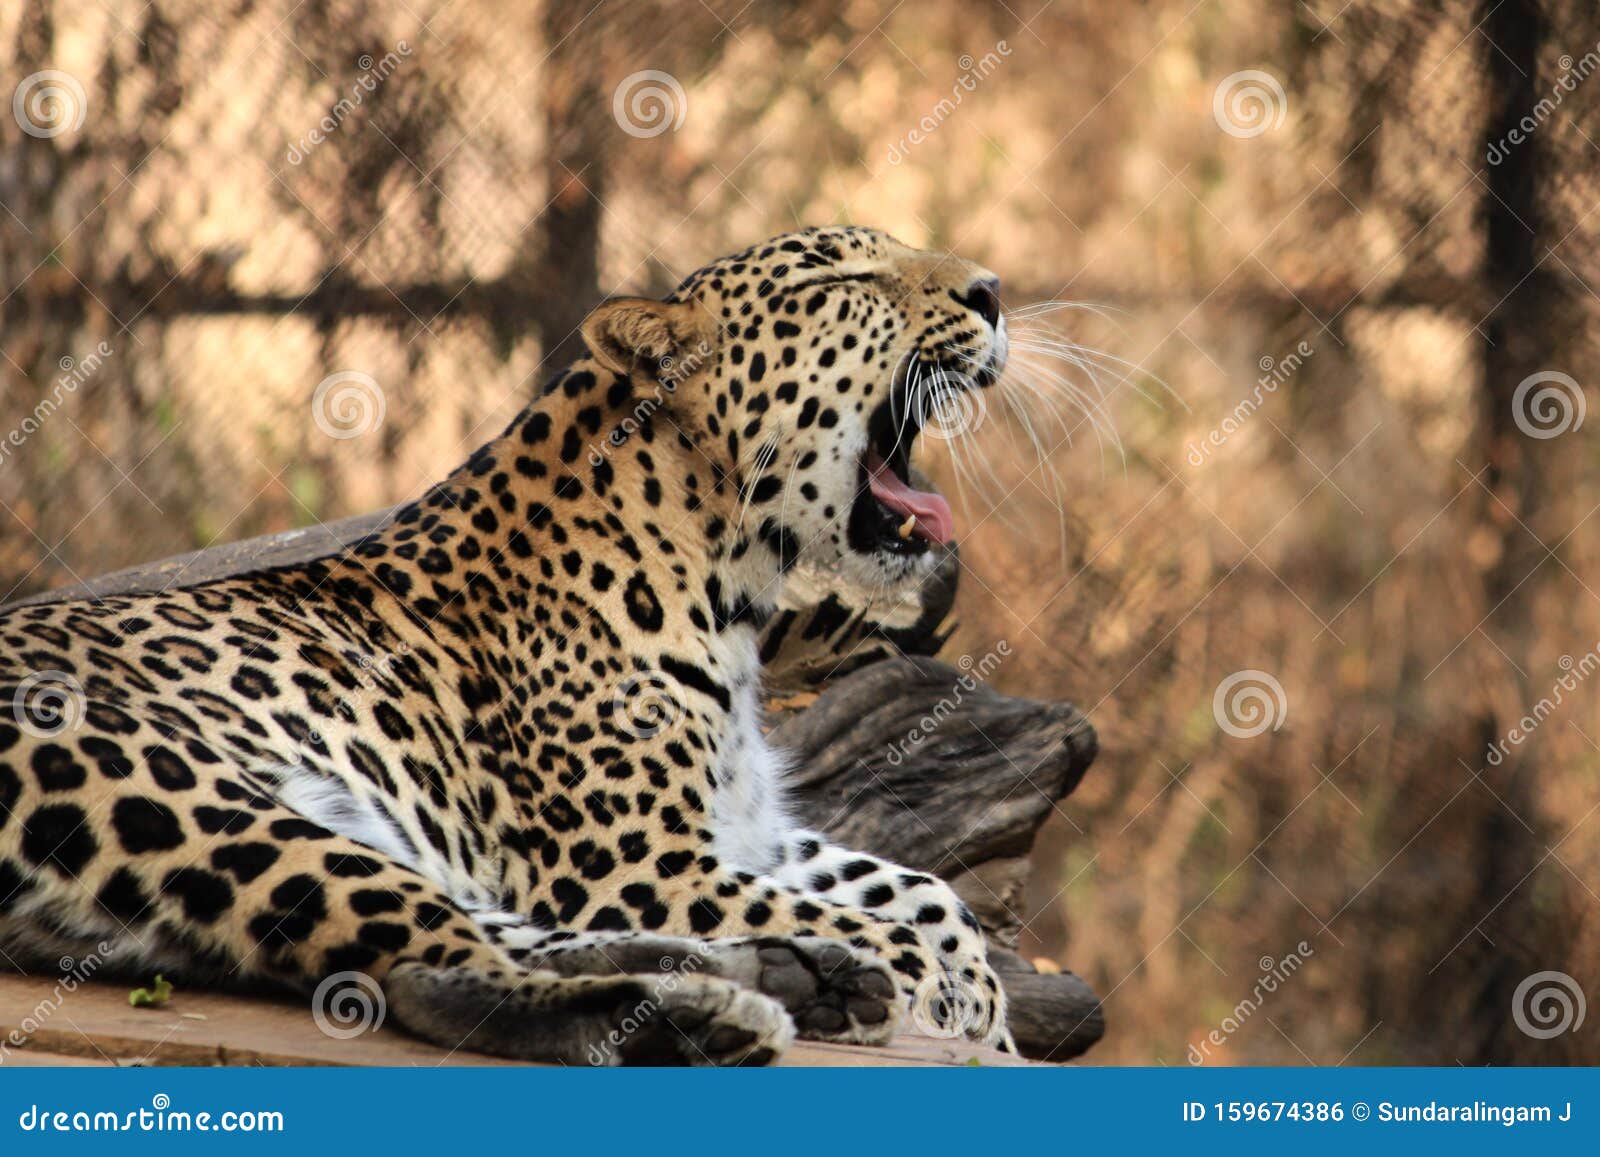 yawn of the indian leopard